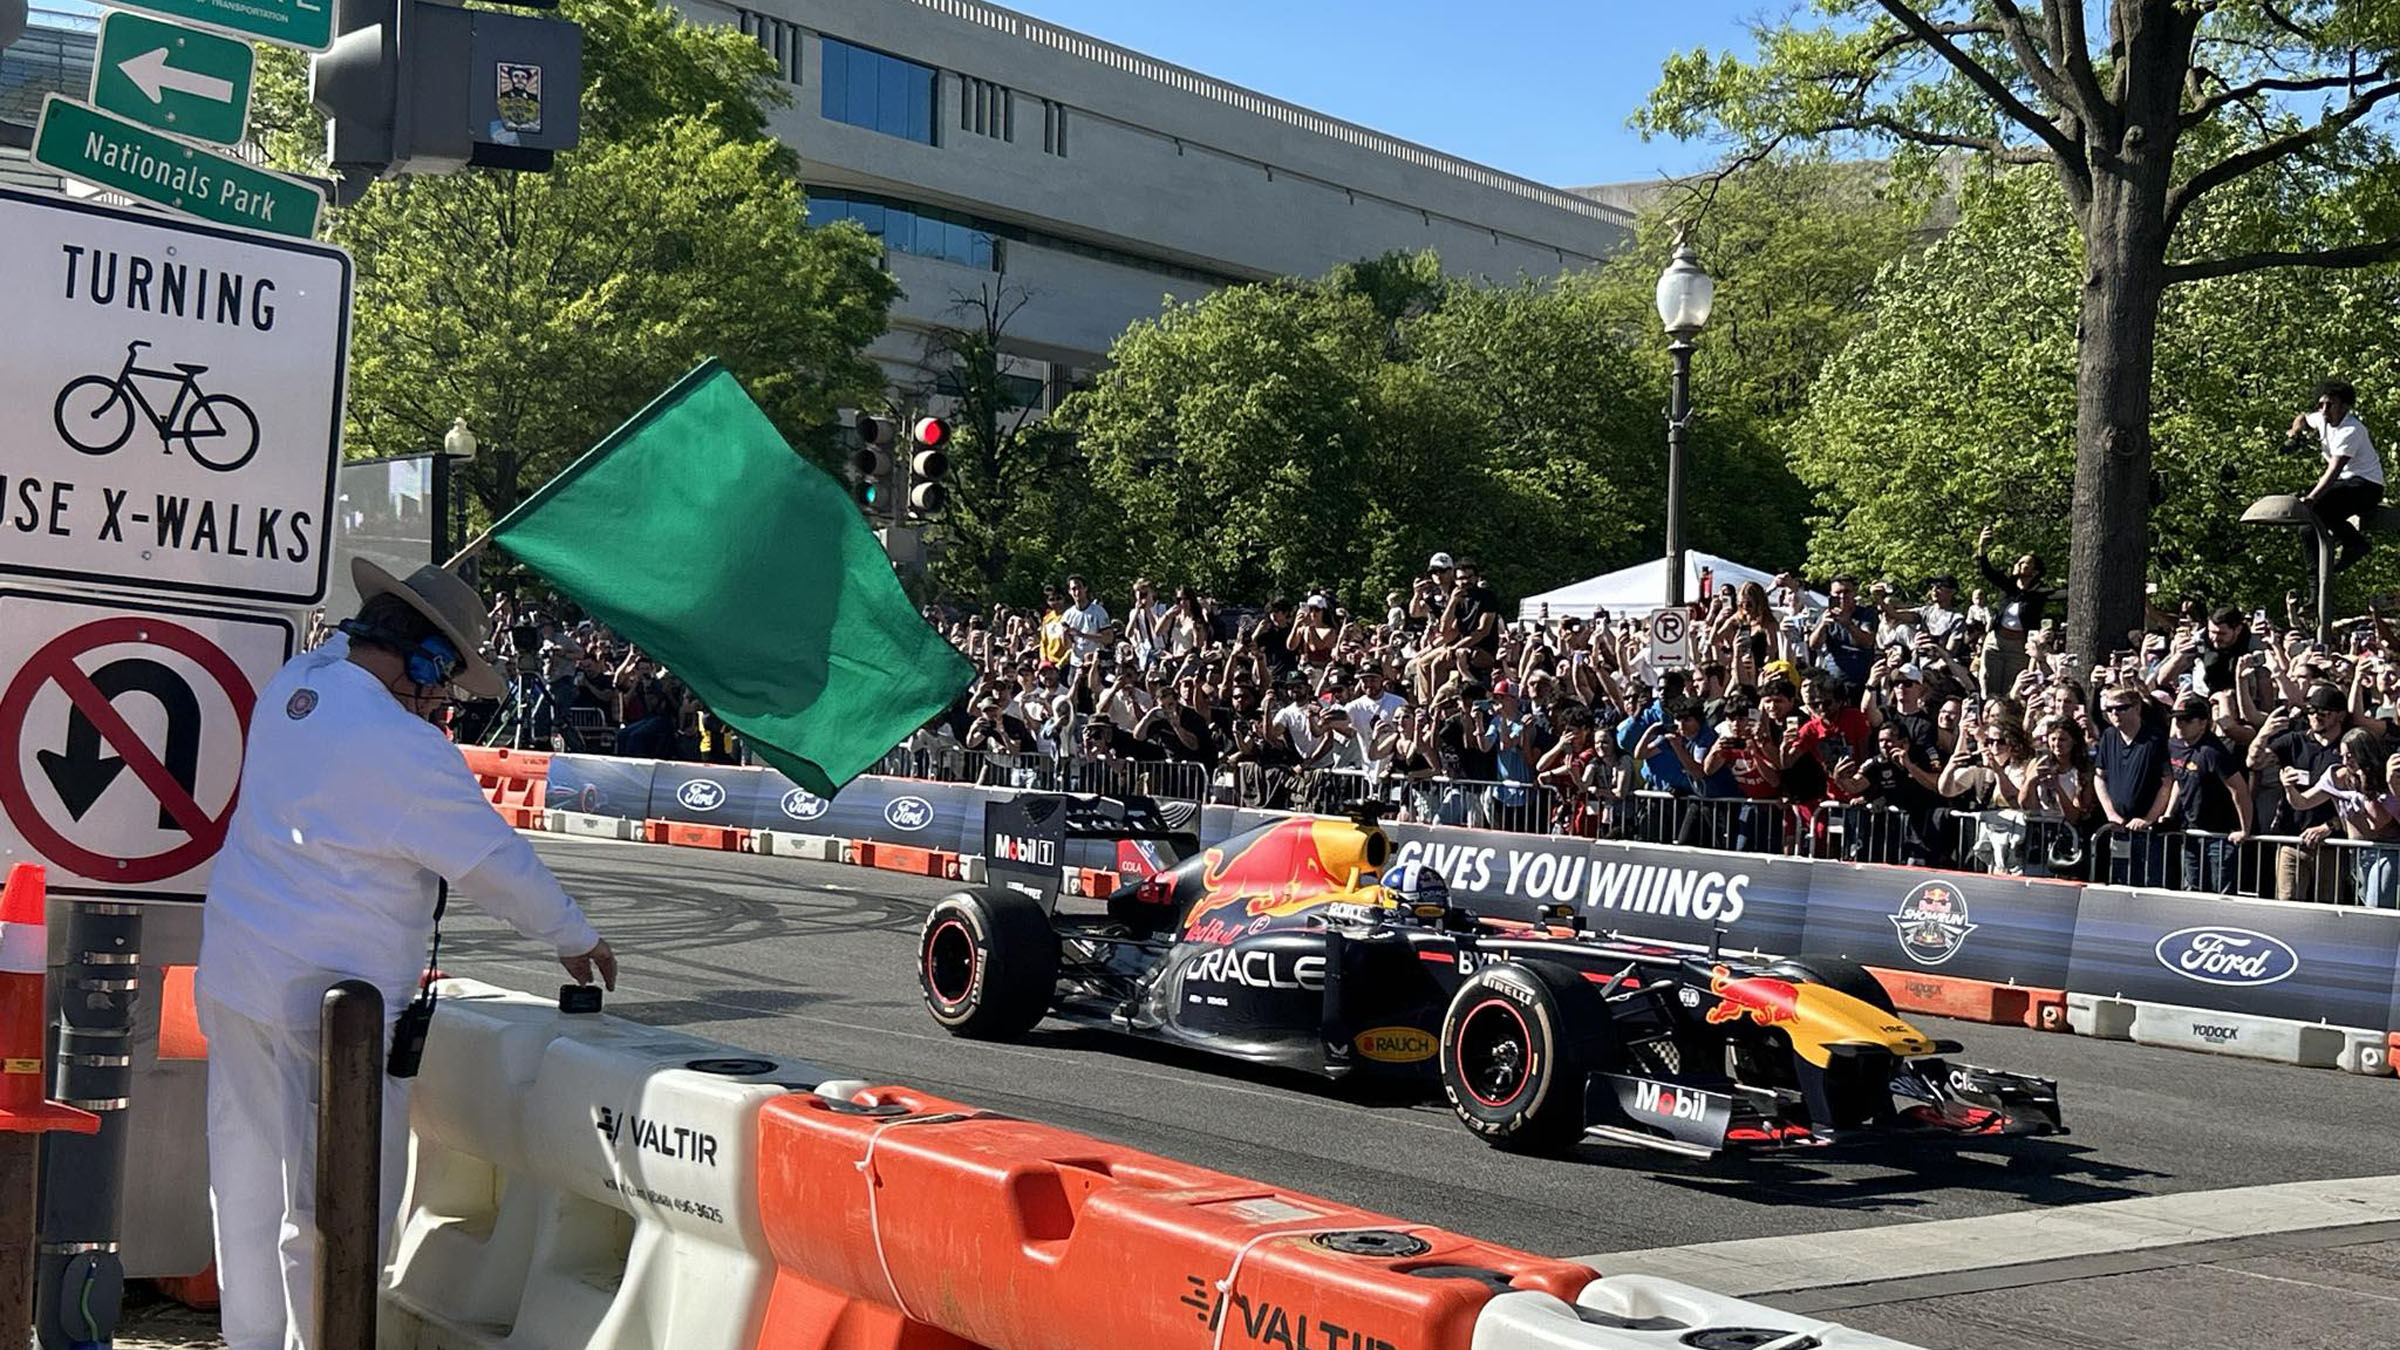 PHOTOS: Red Bull Showrun brings race cars and more to the streets of DC - WTOP